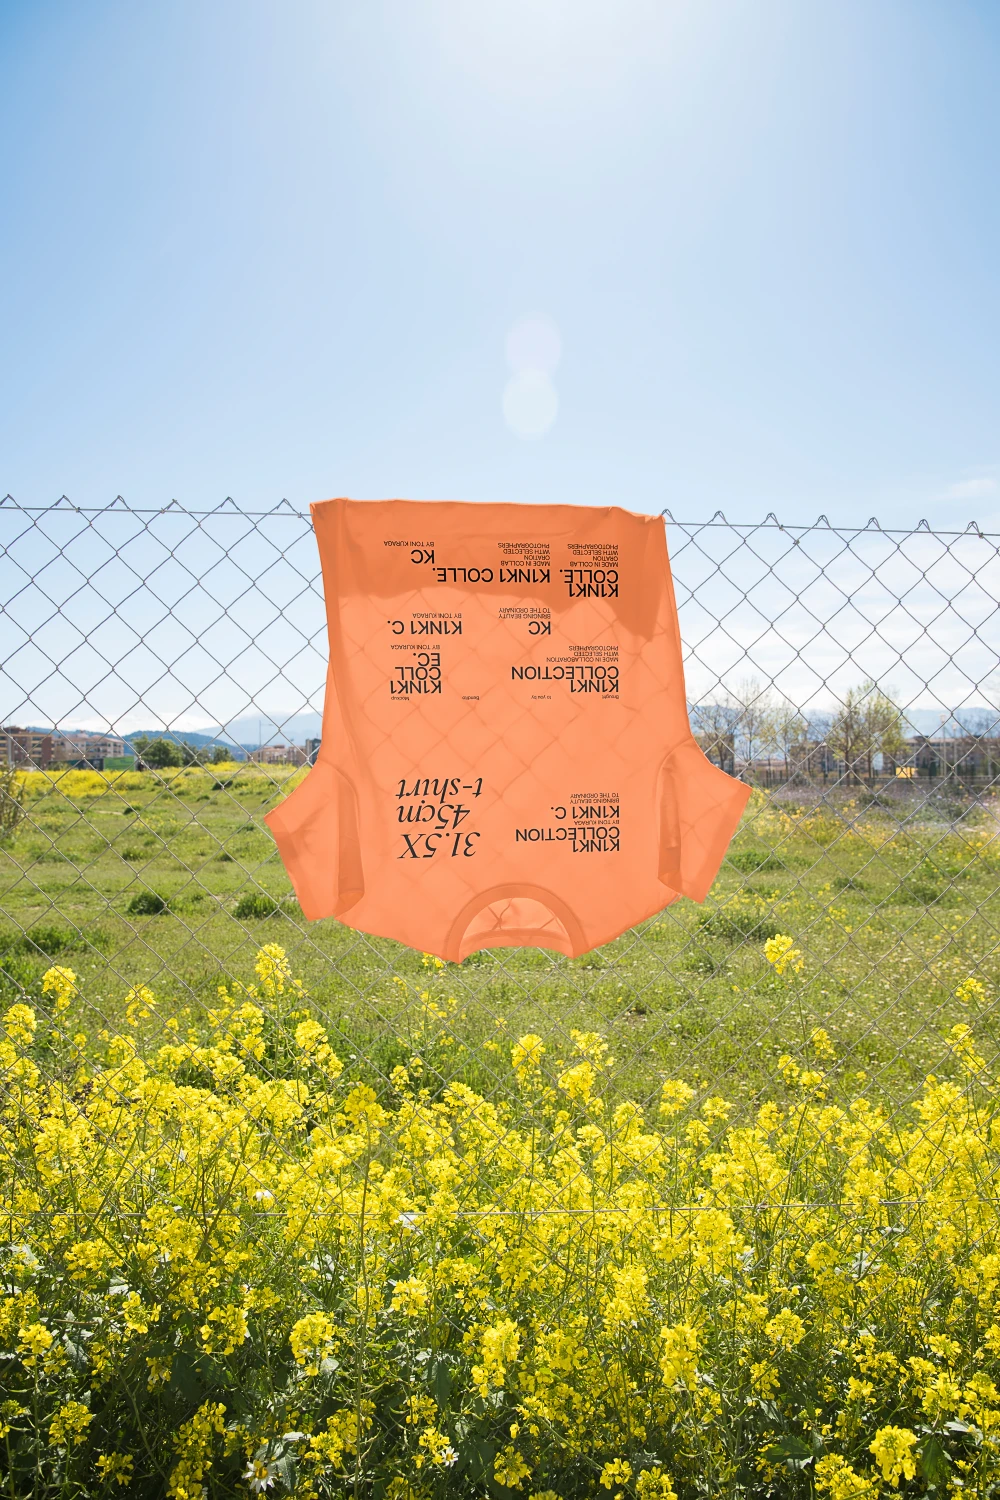 Urban t-shirt mockup hanging in a fence in the midst of a flower field.